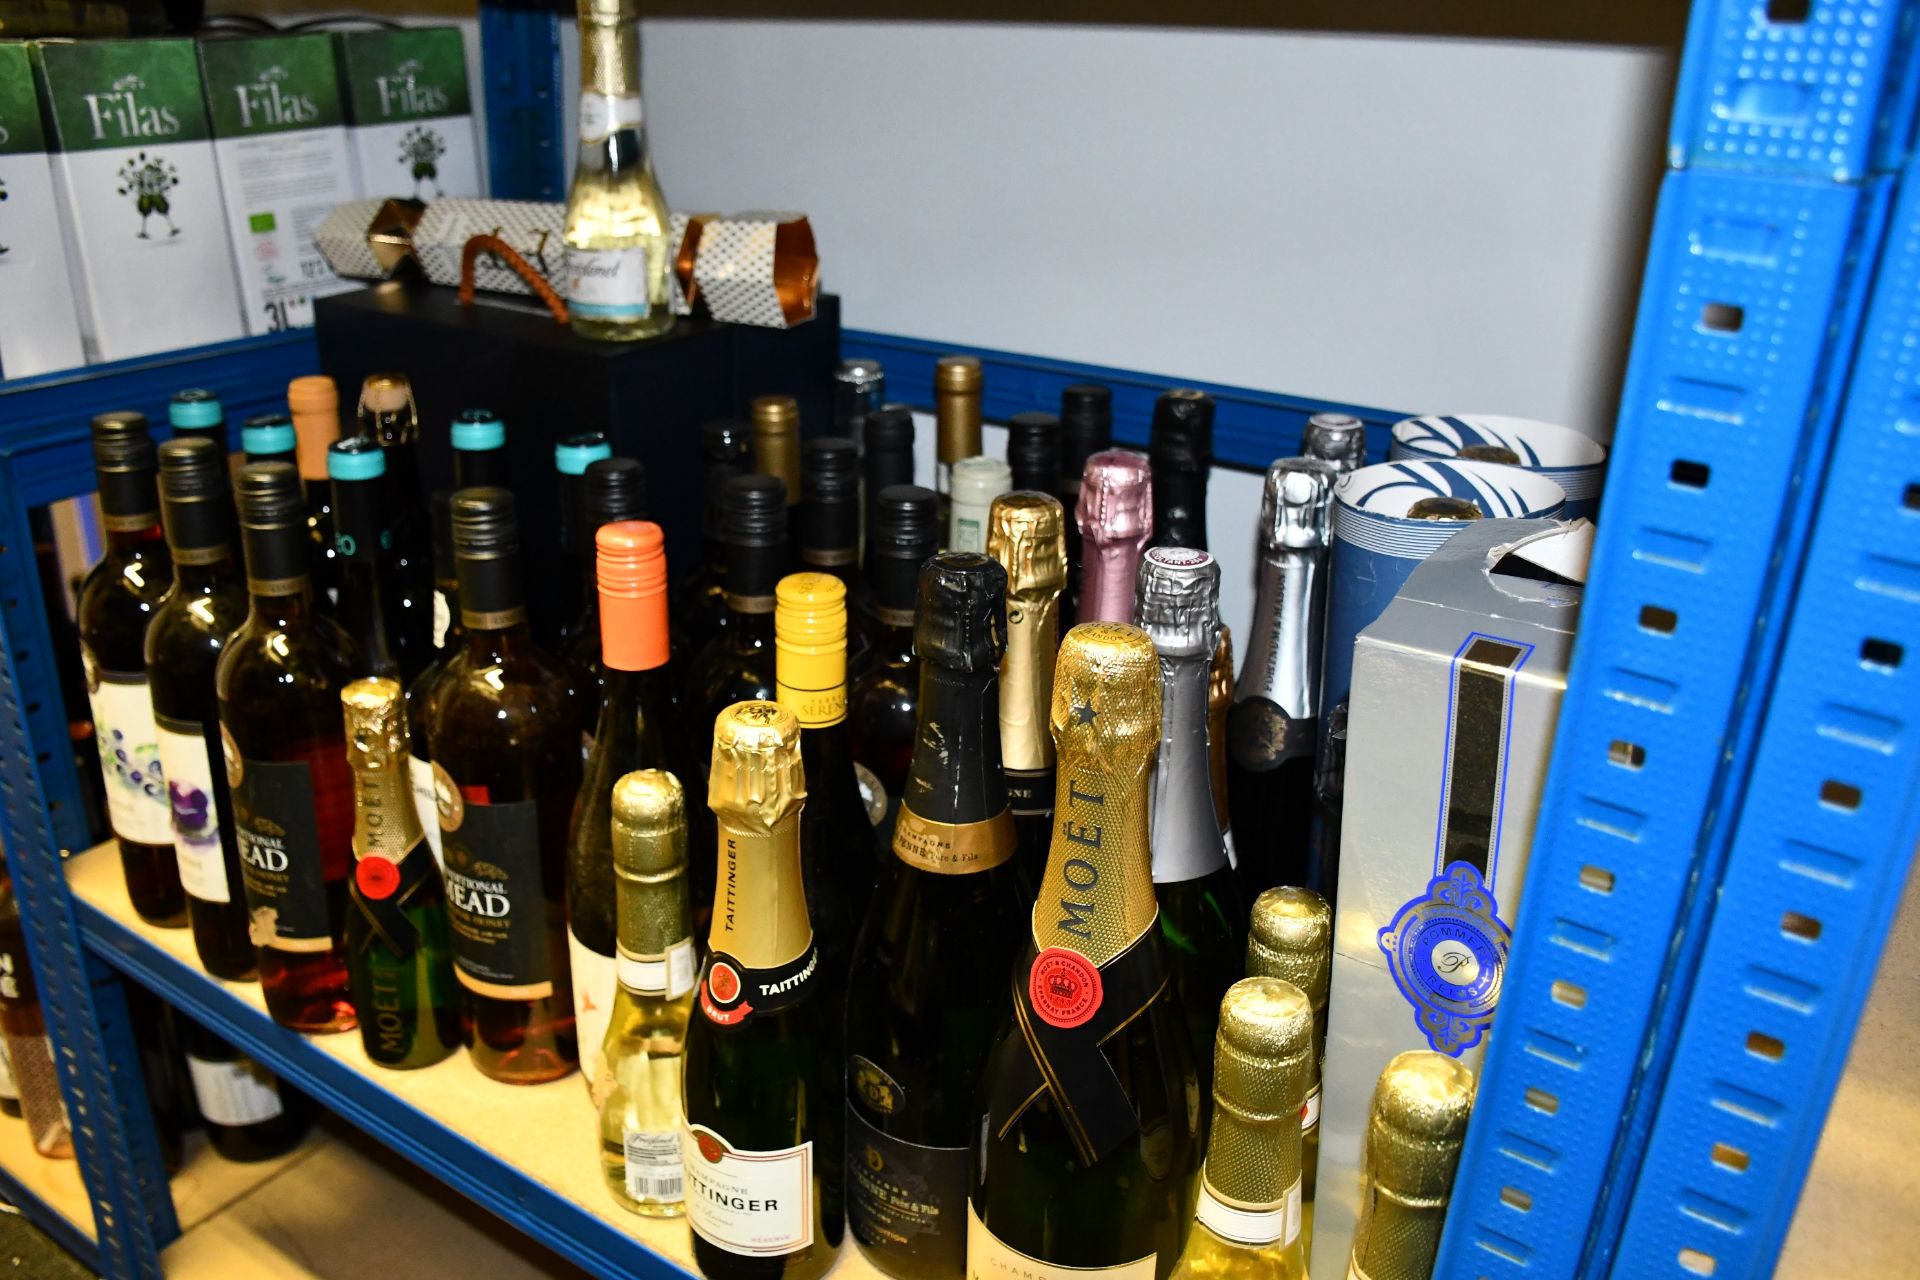 A shelf containing wines/champagnes to include Taittinger, Mead, Moet and Chandon (Over 18s only).